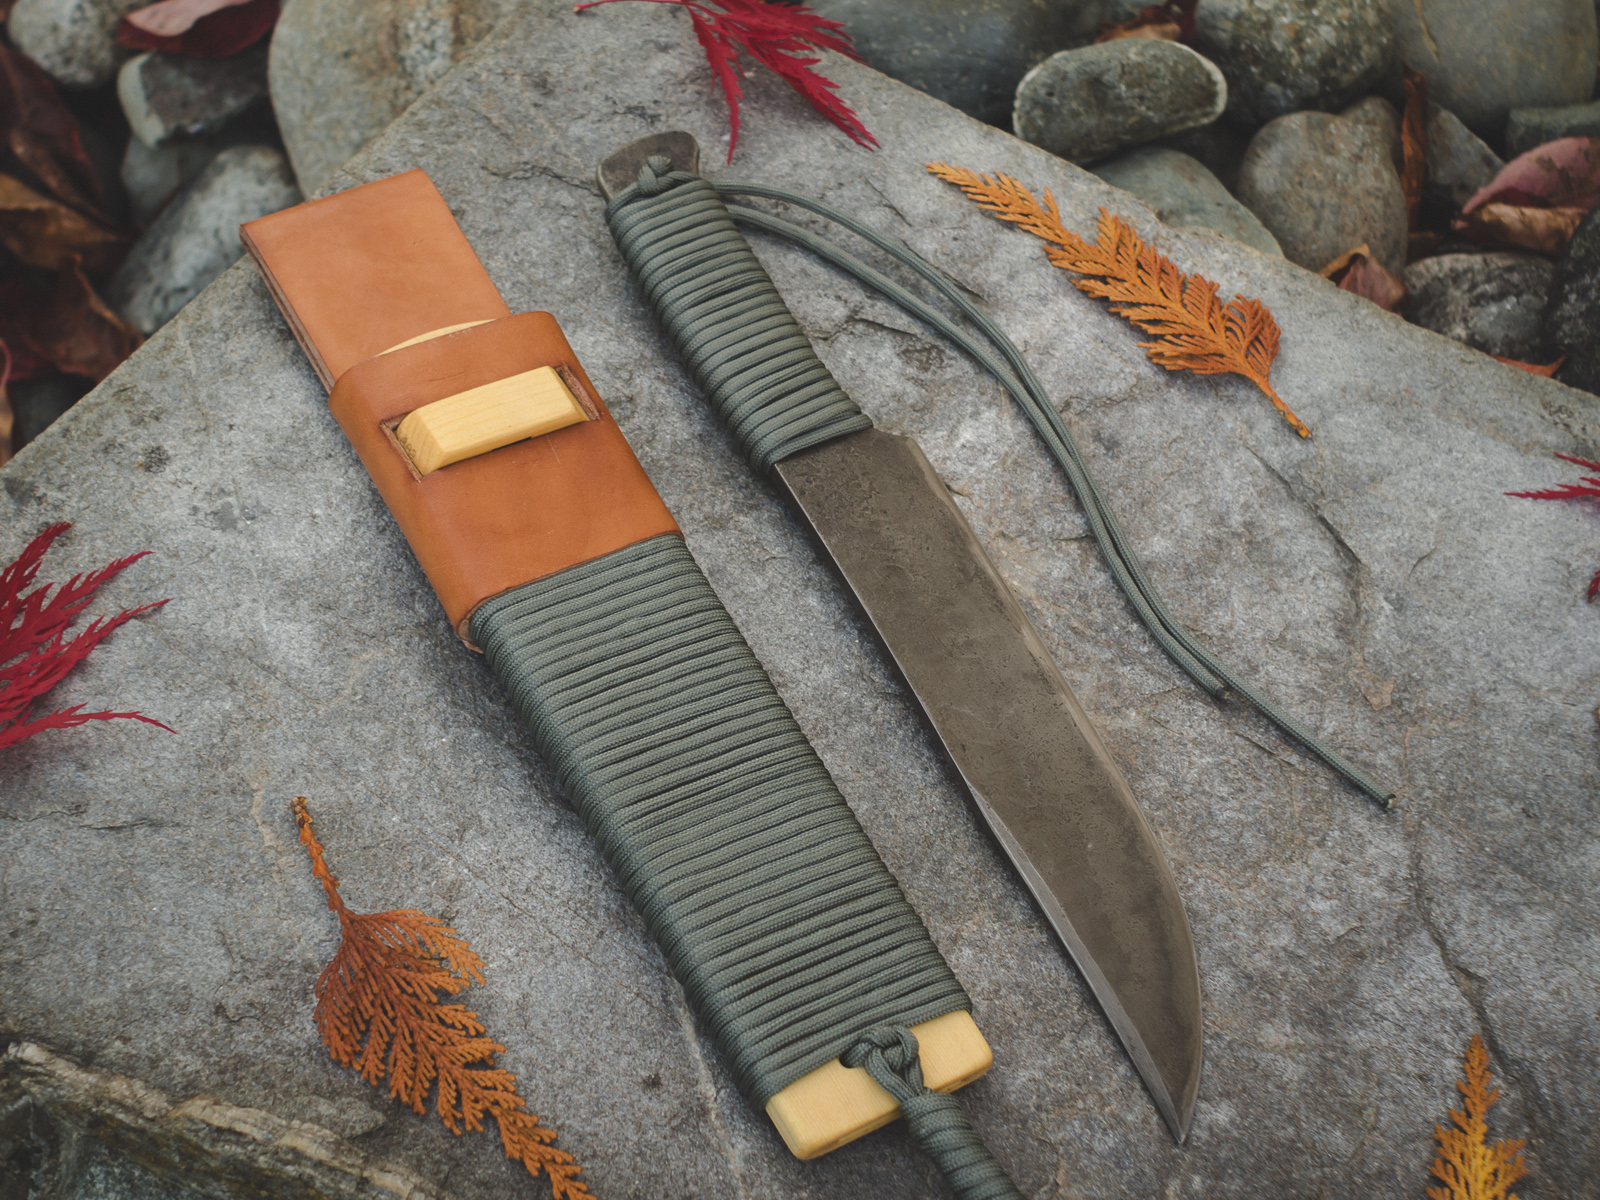 Island Blacksmith: Hand crafted 309 camp bowie made from reclaimed steel using traditional techniques